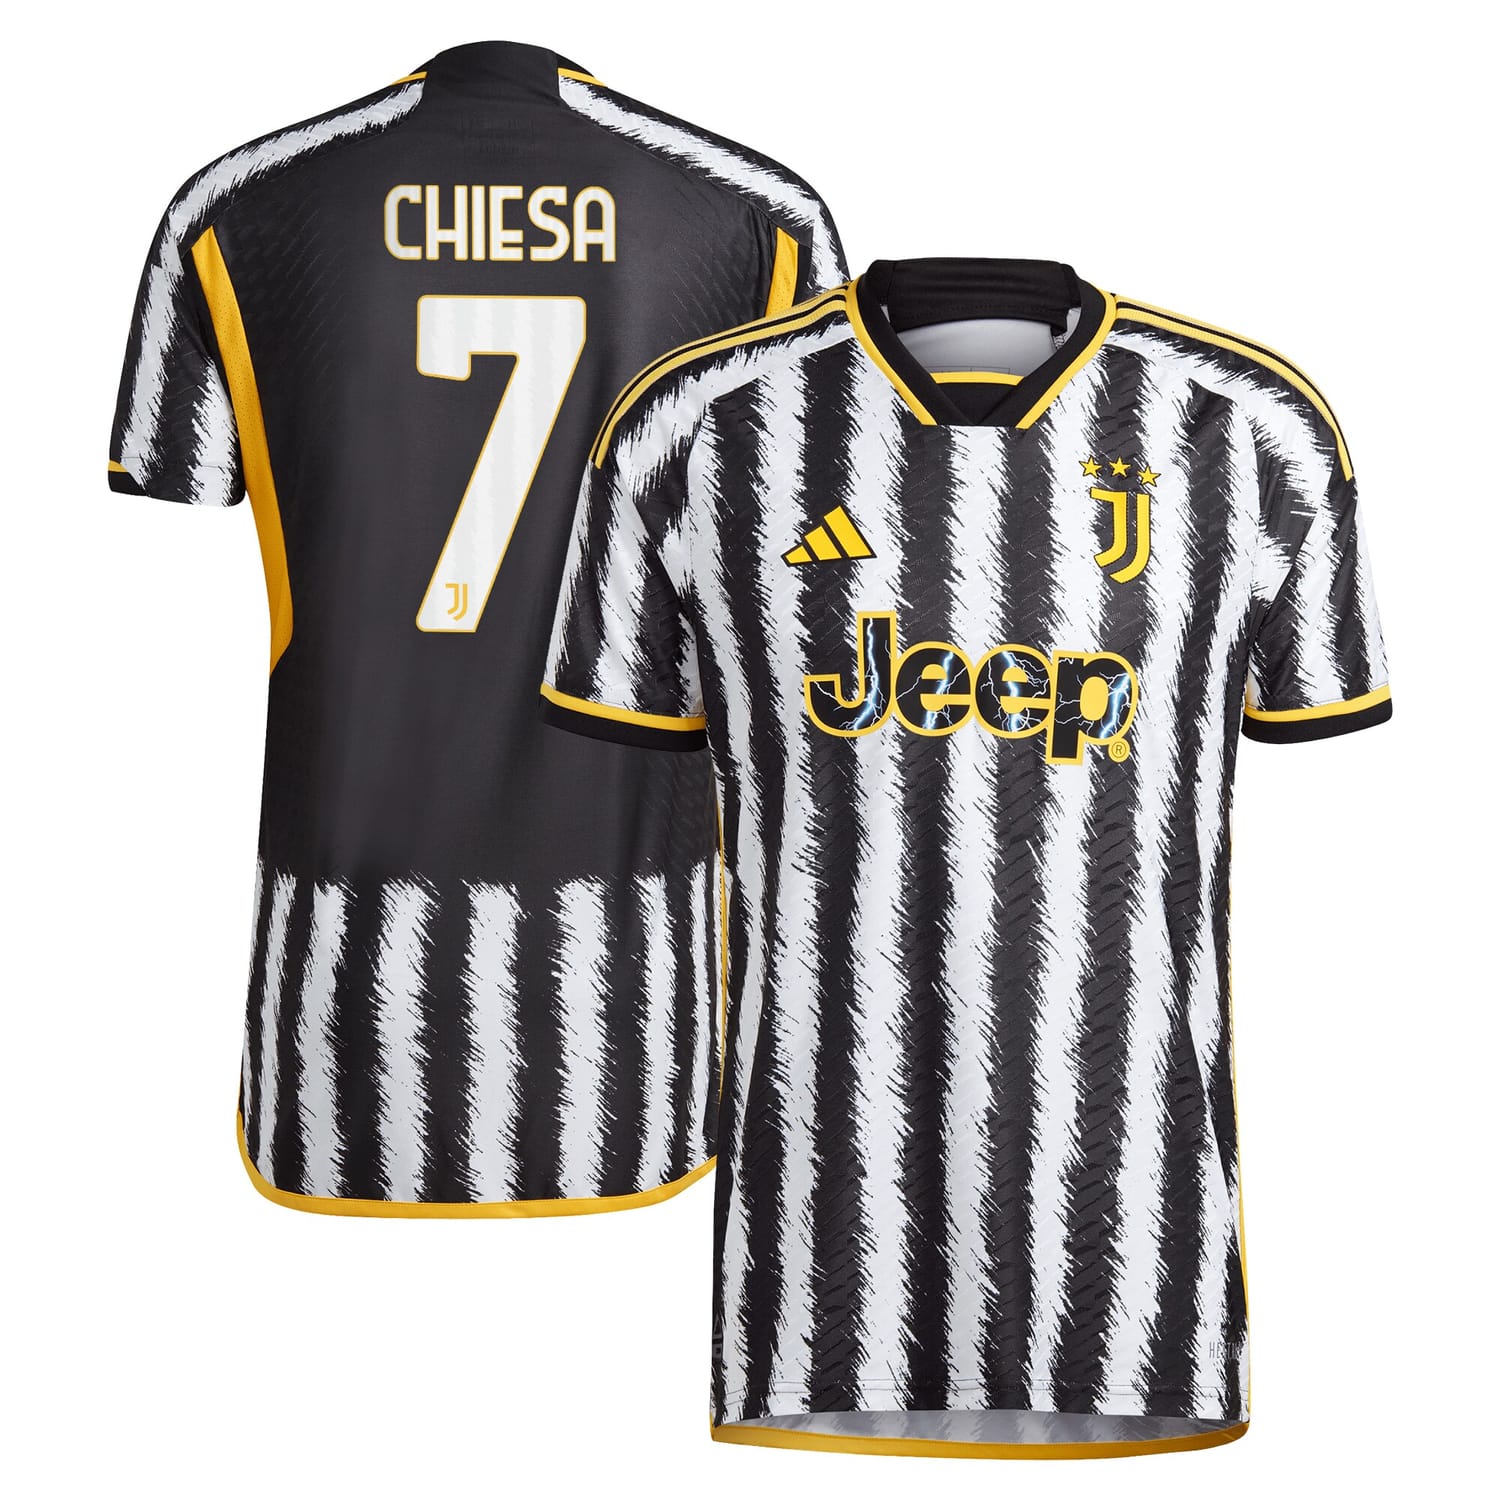 Serie A Juventus Home Authentic Jersey Shirt Black 2023-24 player Federico Chiesa printing for Men